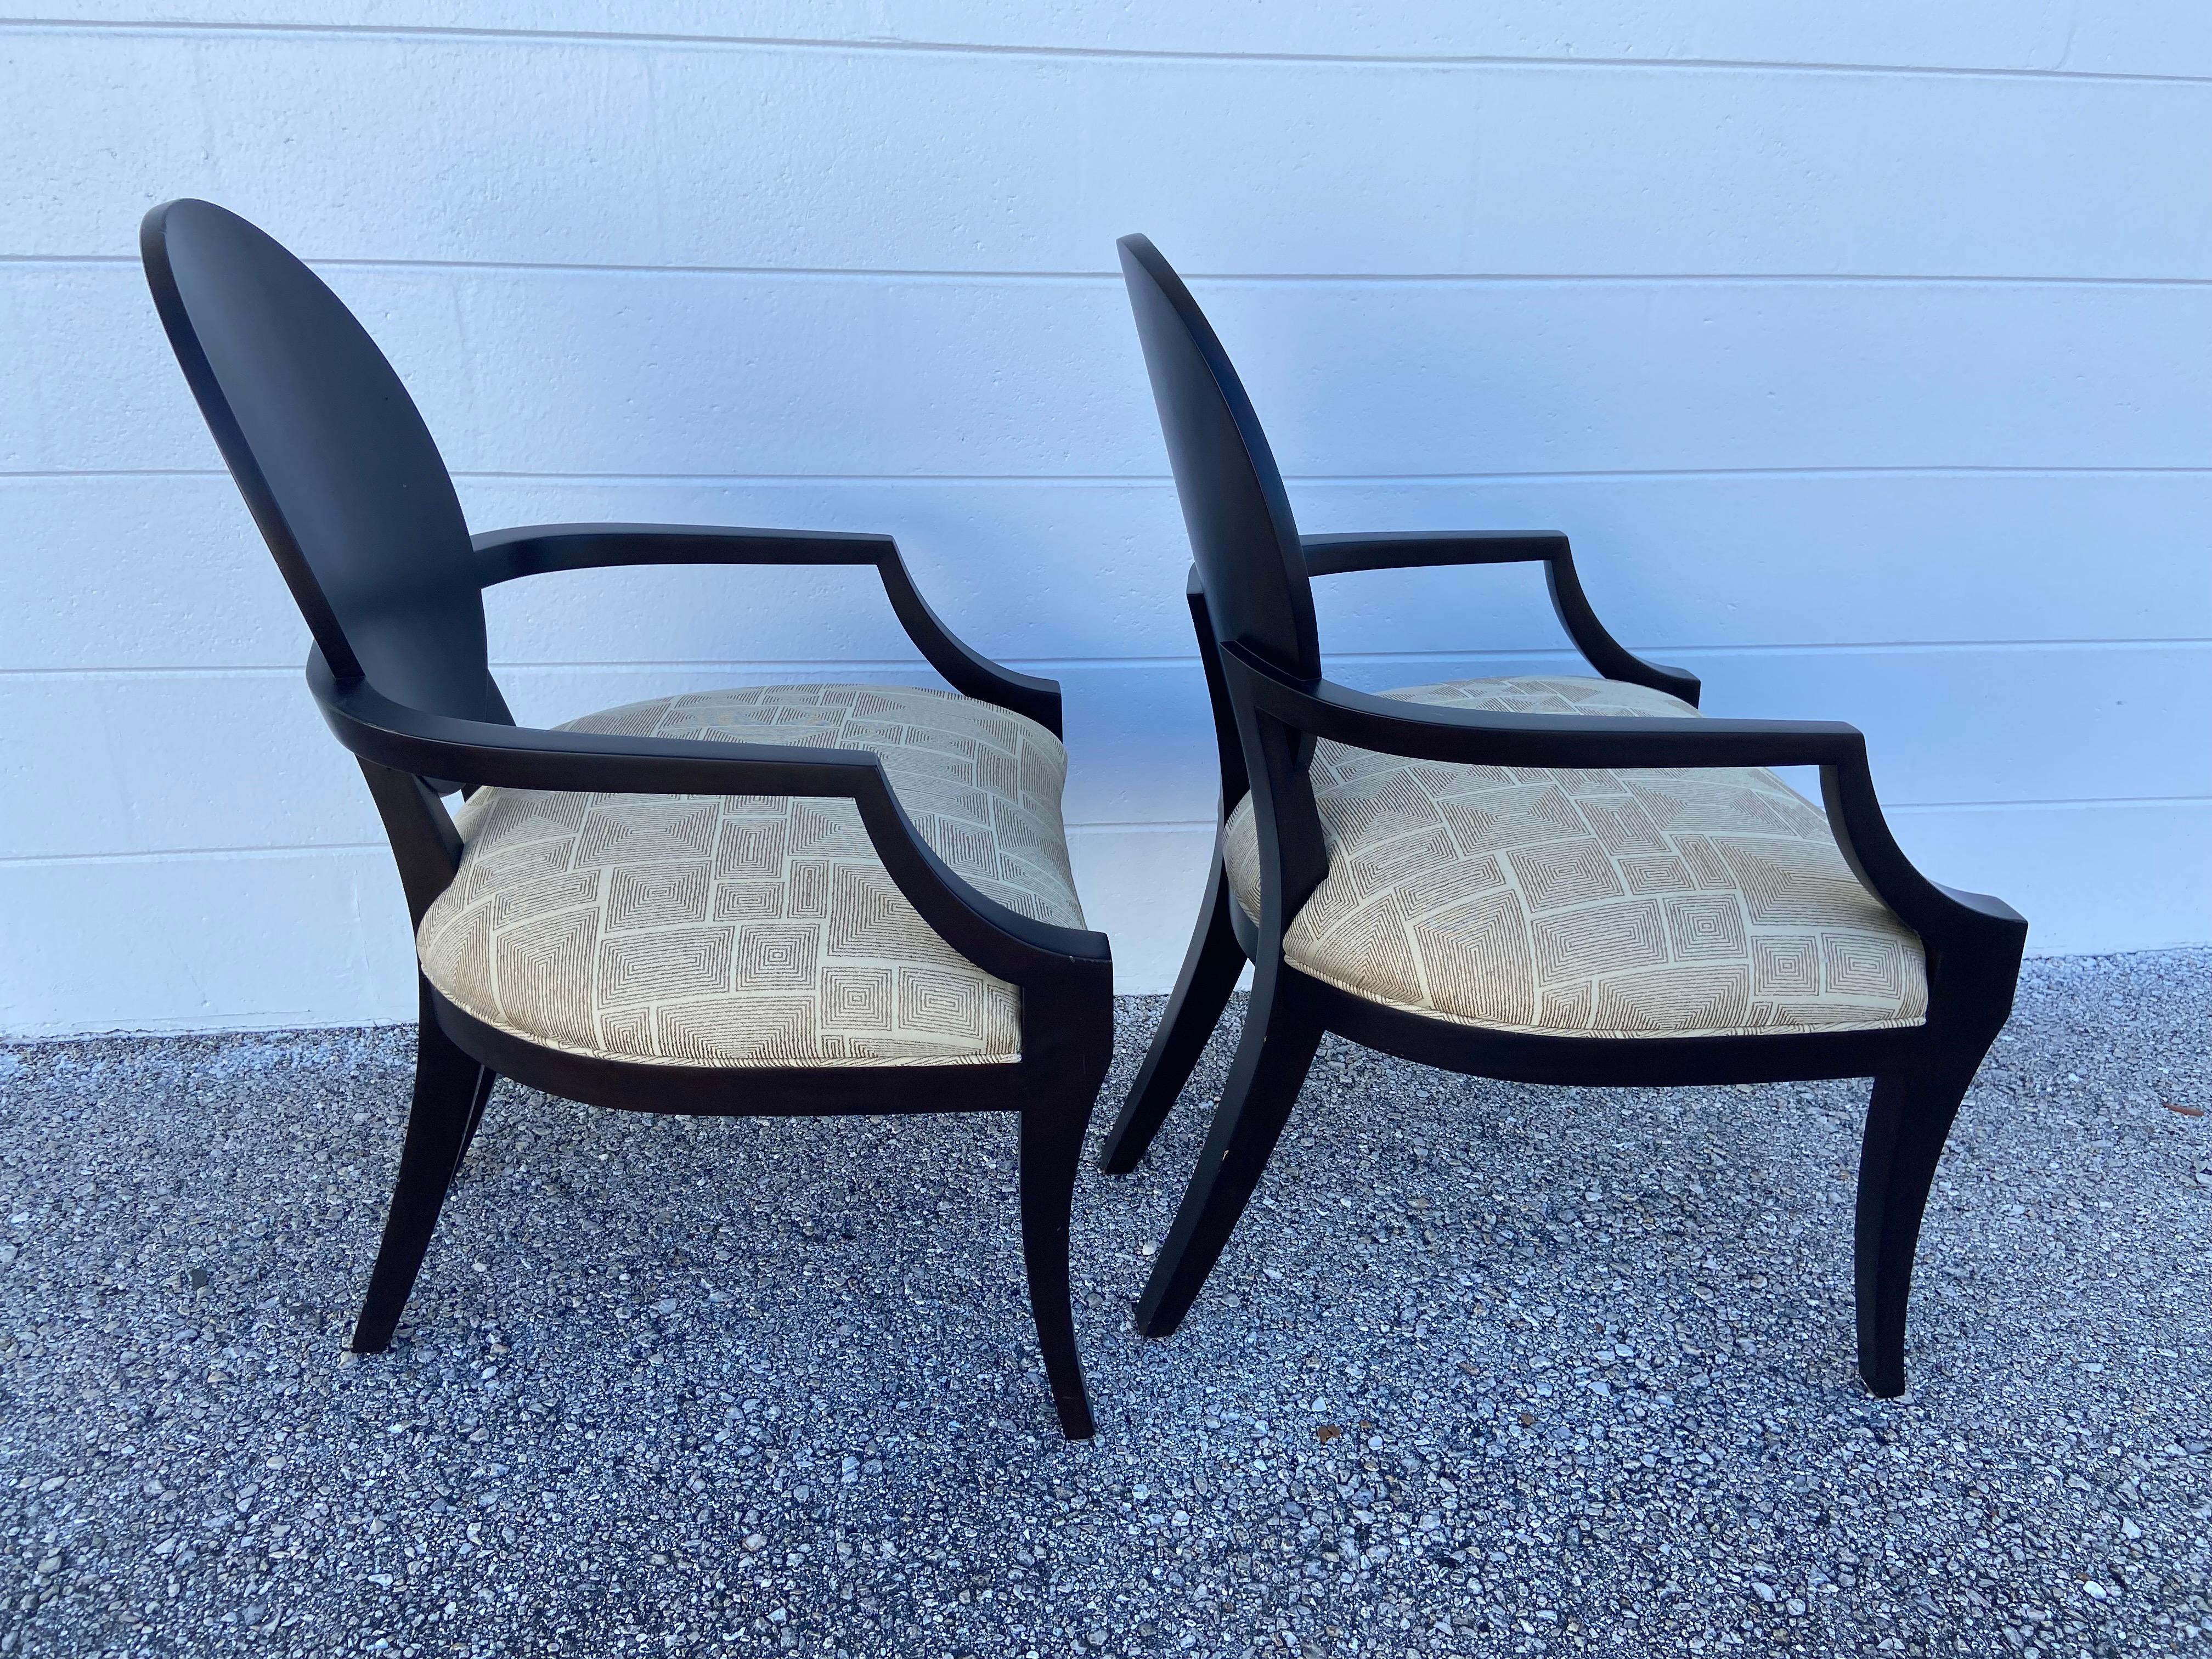 A pair of Barbara Berry inspired oval frame chairs. These pieces are unique because of the design and quality. We have a total of 10, but we are selling 2 at a time. They are wood, with a unique arm detail on the back. Chocolate brown/black with